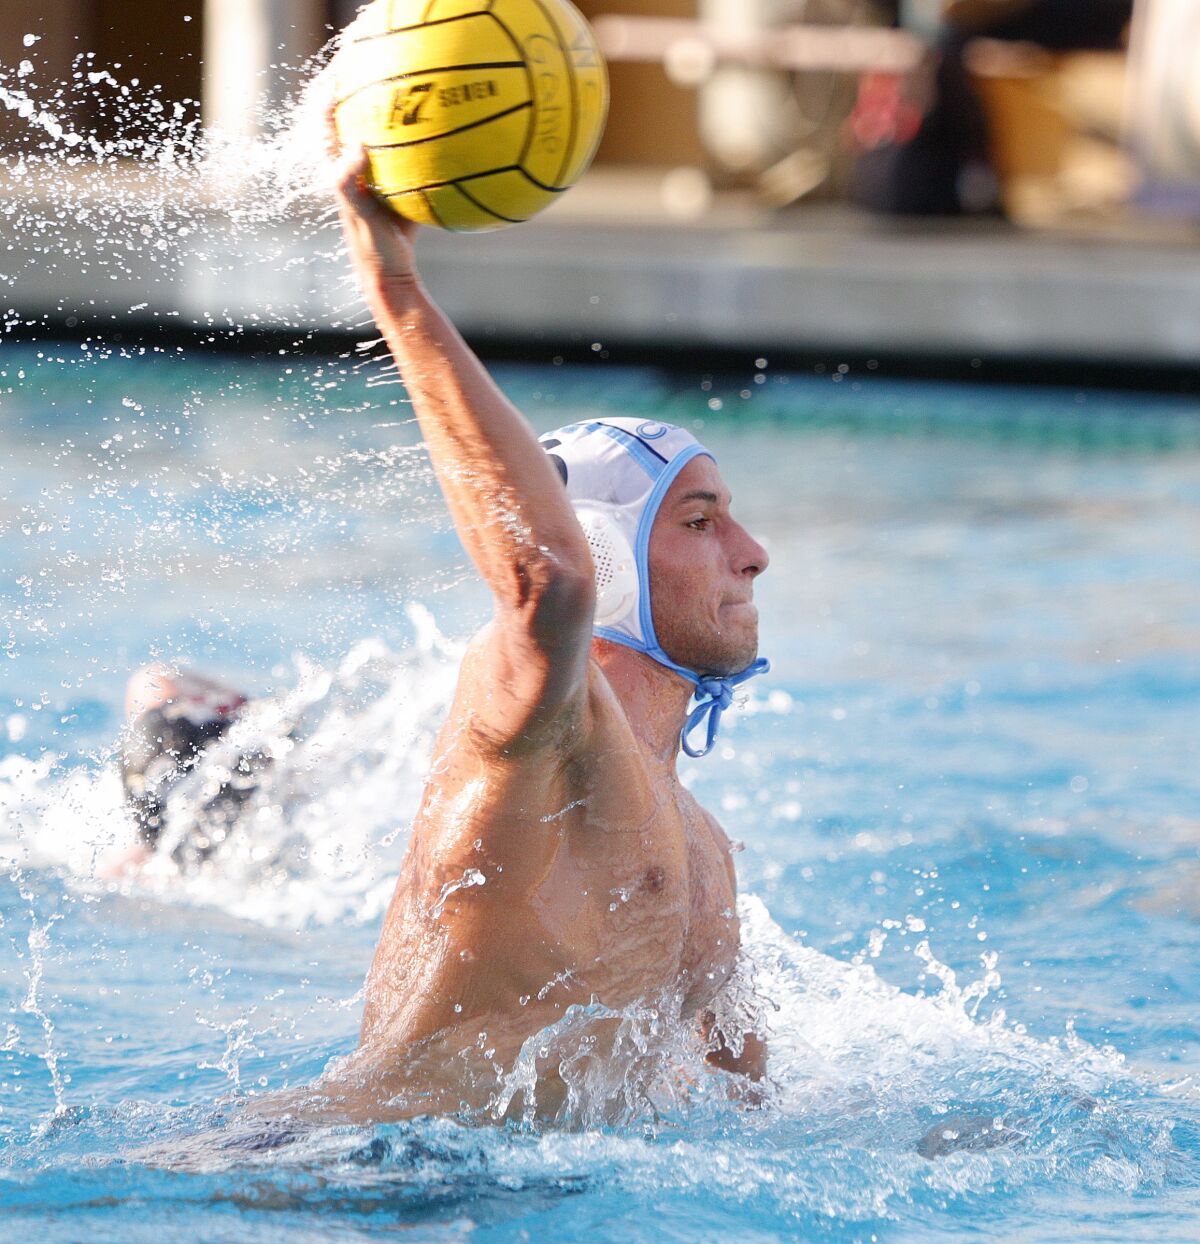 Corona del Mar's Tyler Harvey shoots against La Serna in the first round of the CIF Southern Section Division 2 playoffs on Nov. 6 at Whittier College.